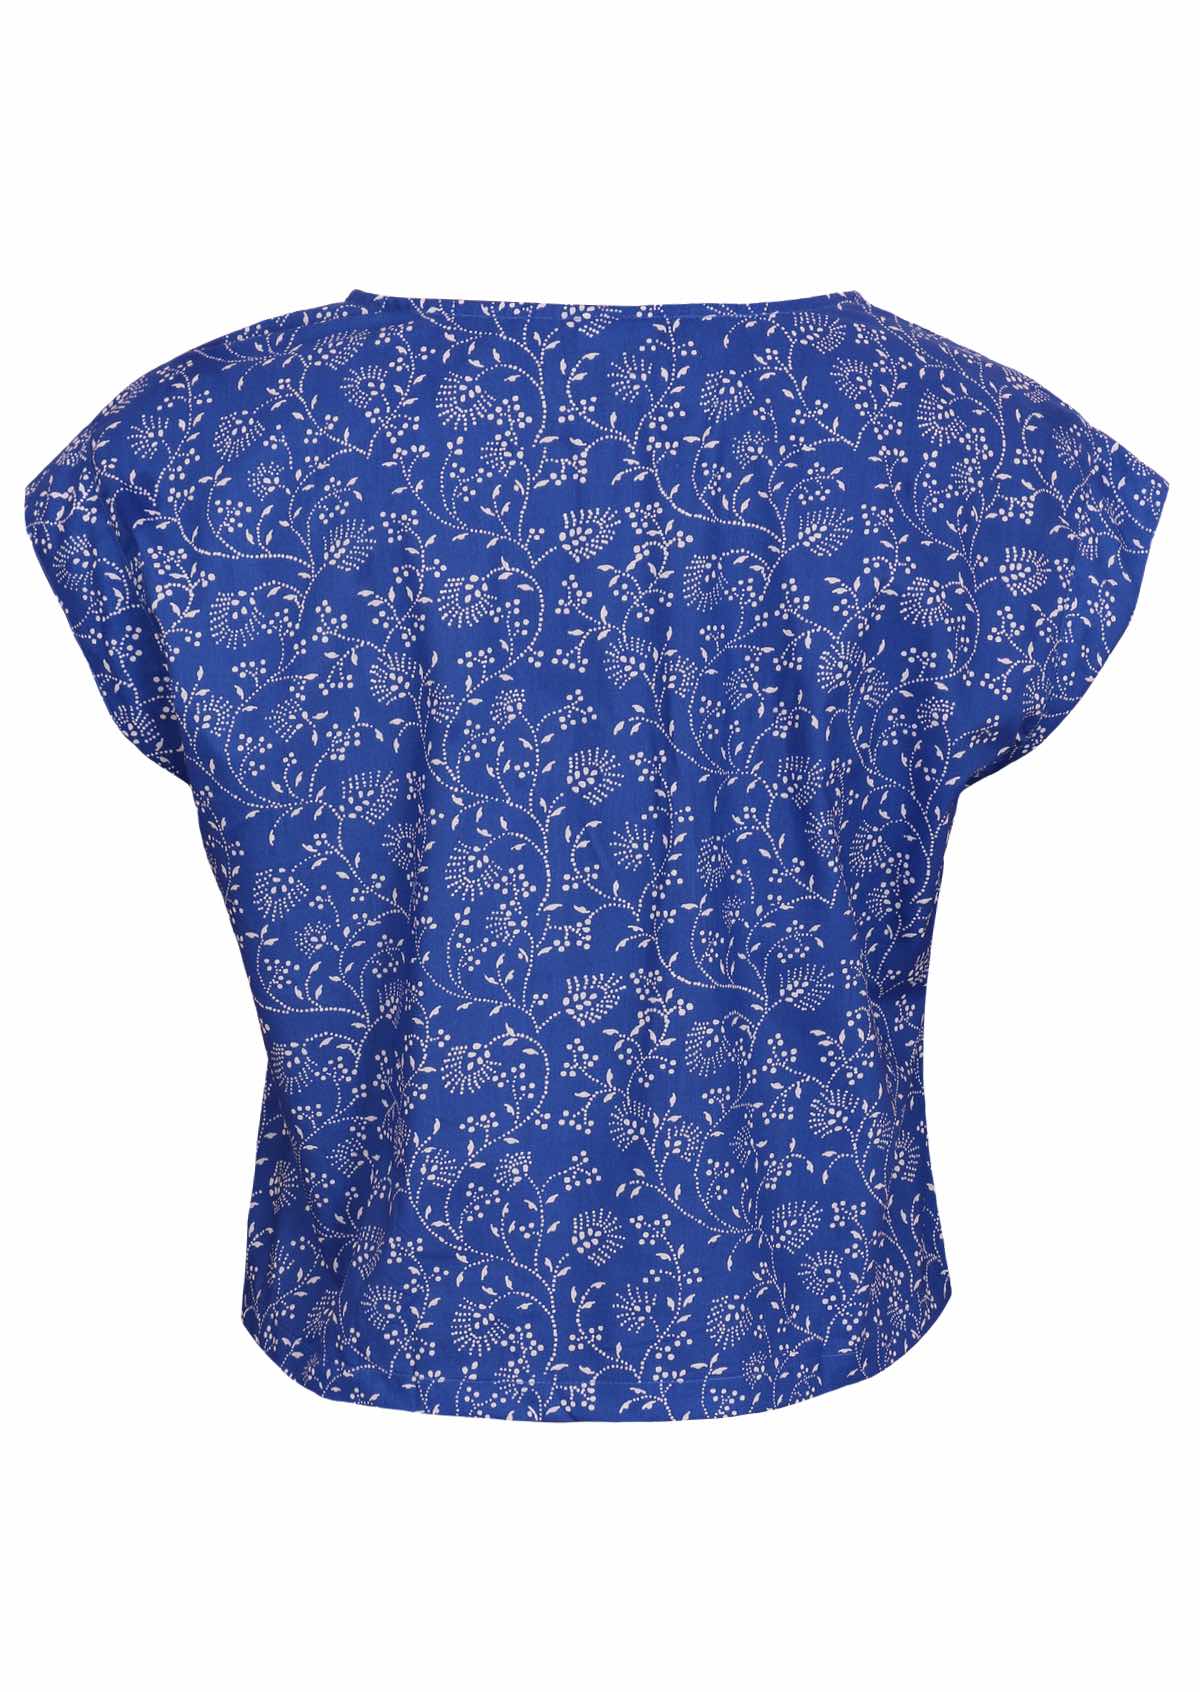 Blue based cotton top ends on the hip. 